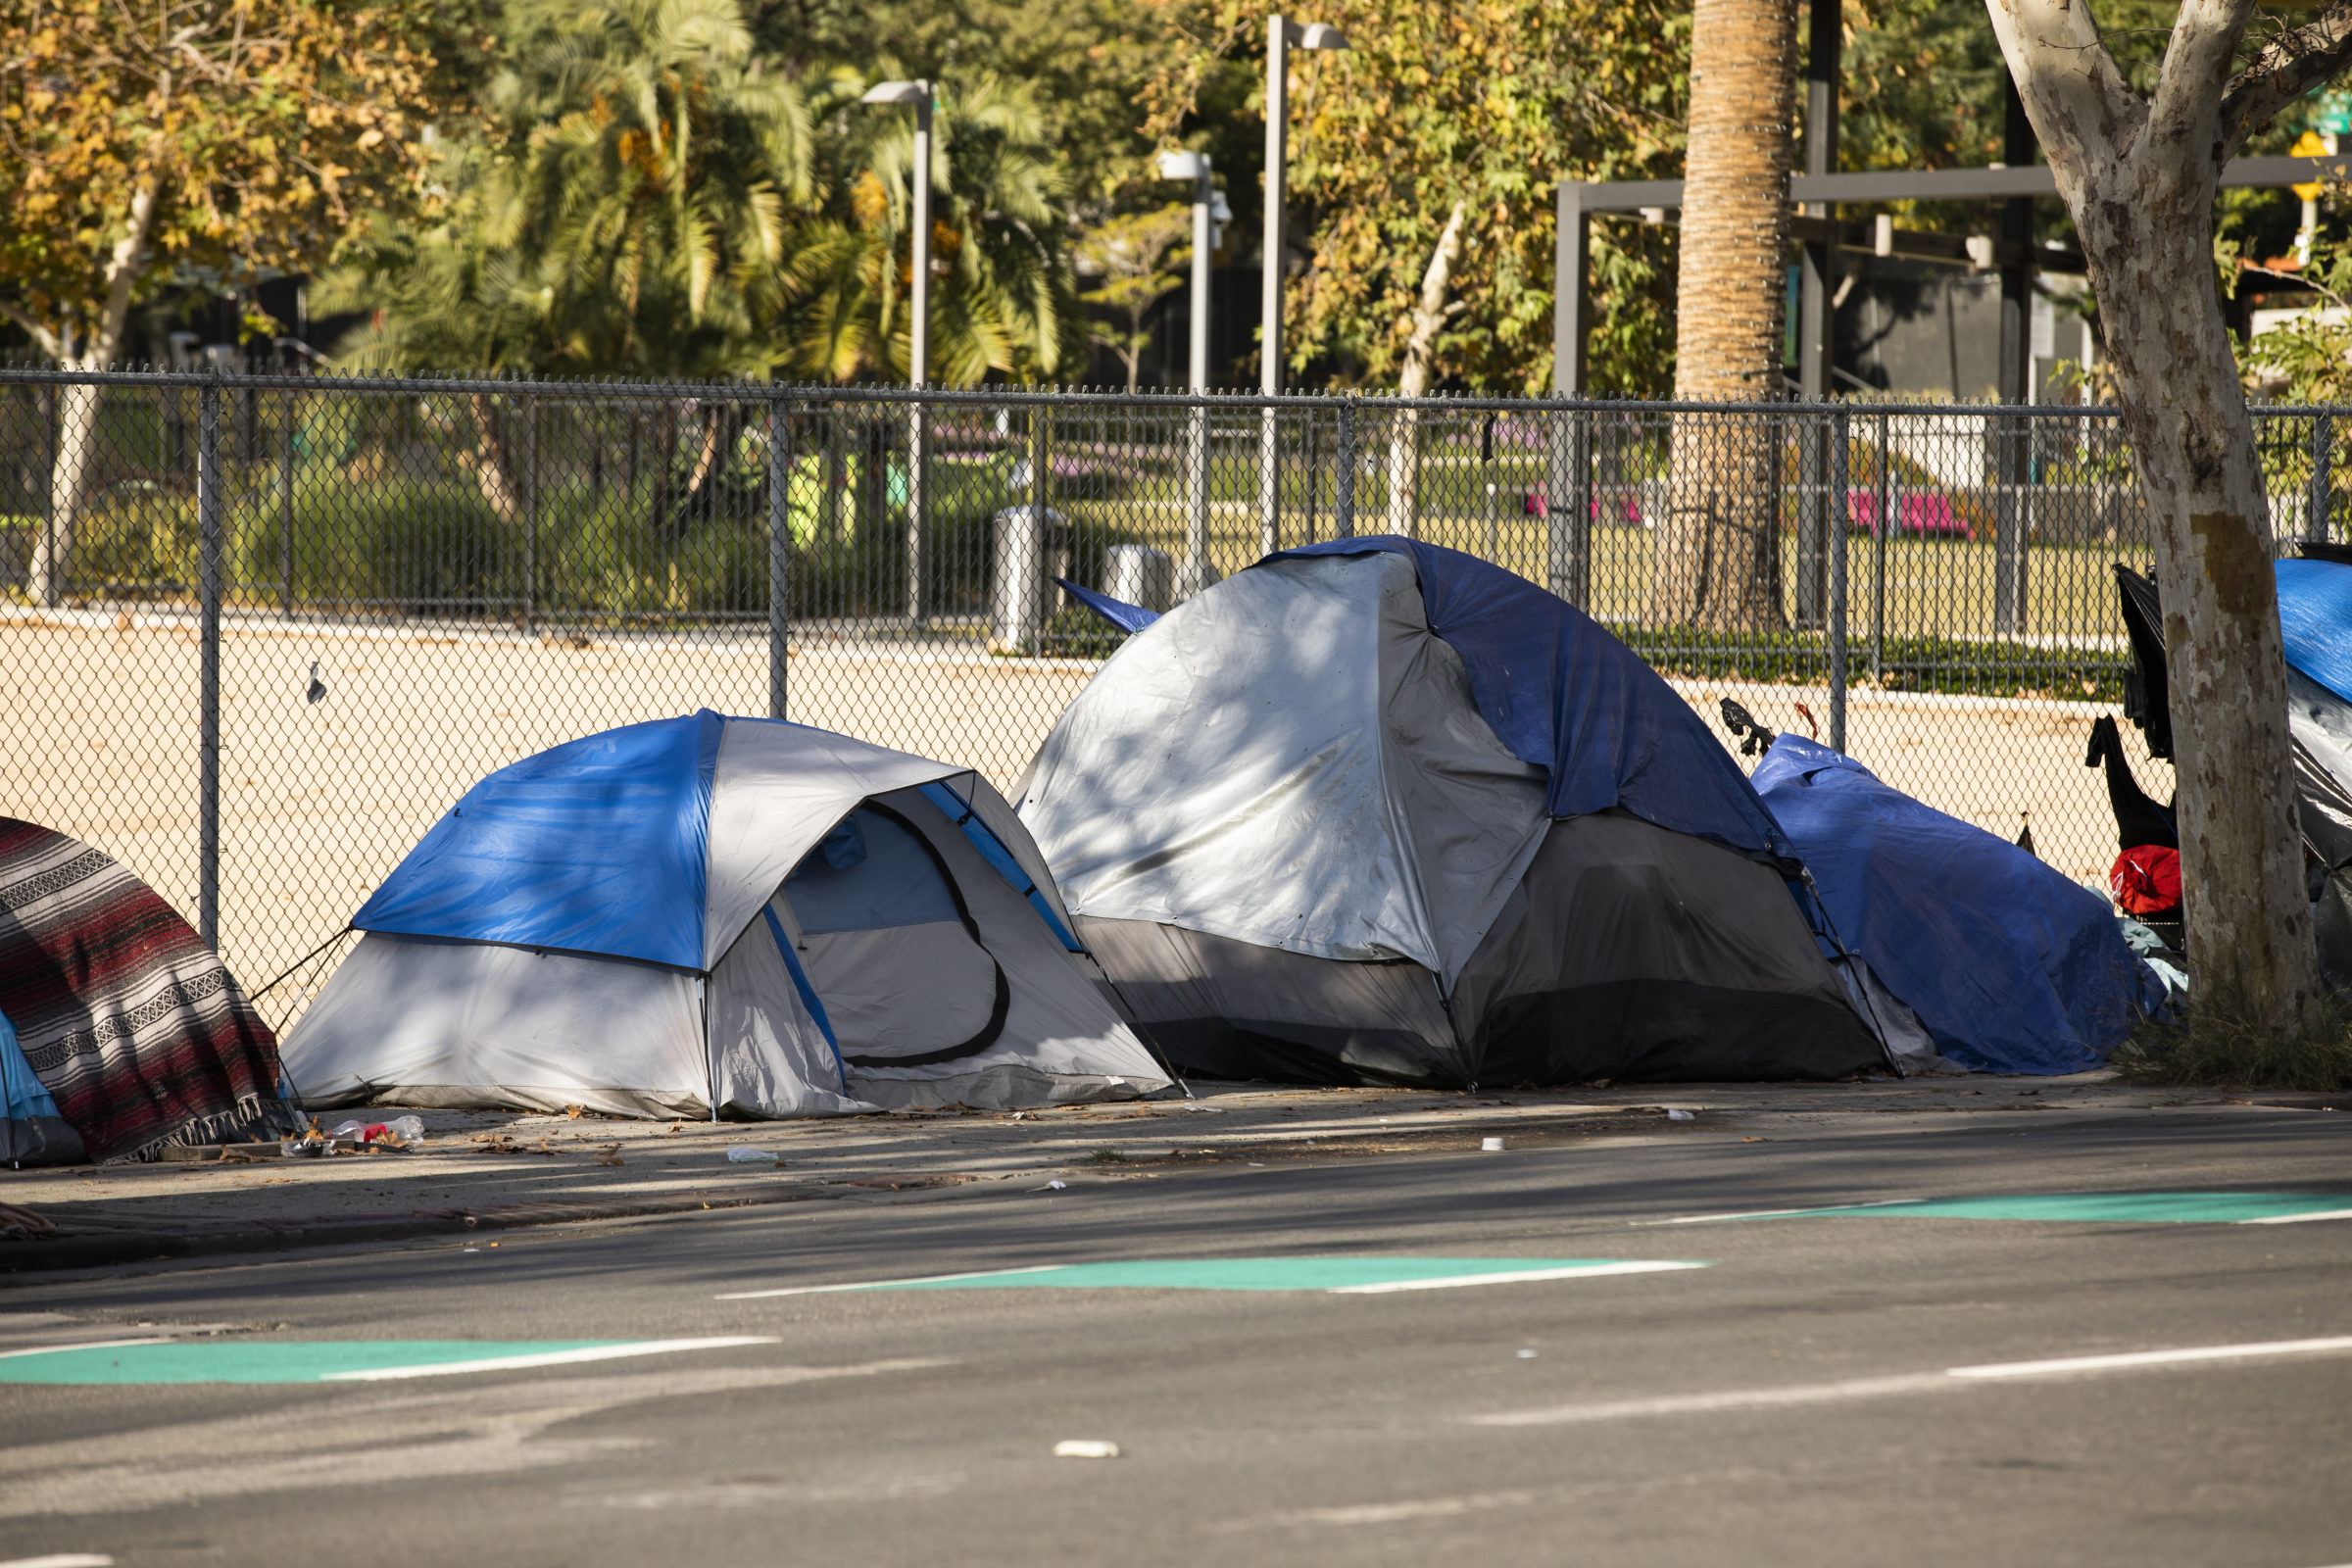 A homeless encampment sits on a street in Downtown Los Angeles, California, USA.